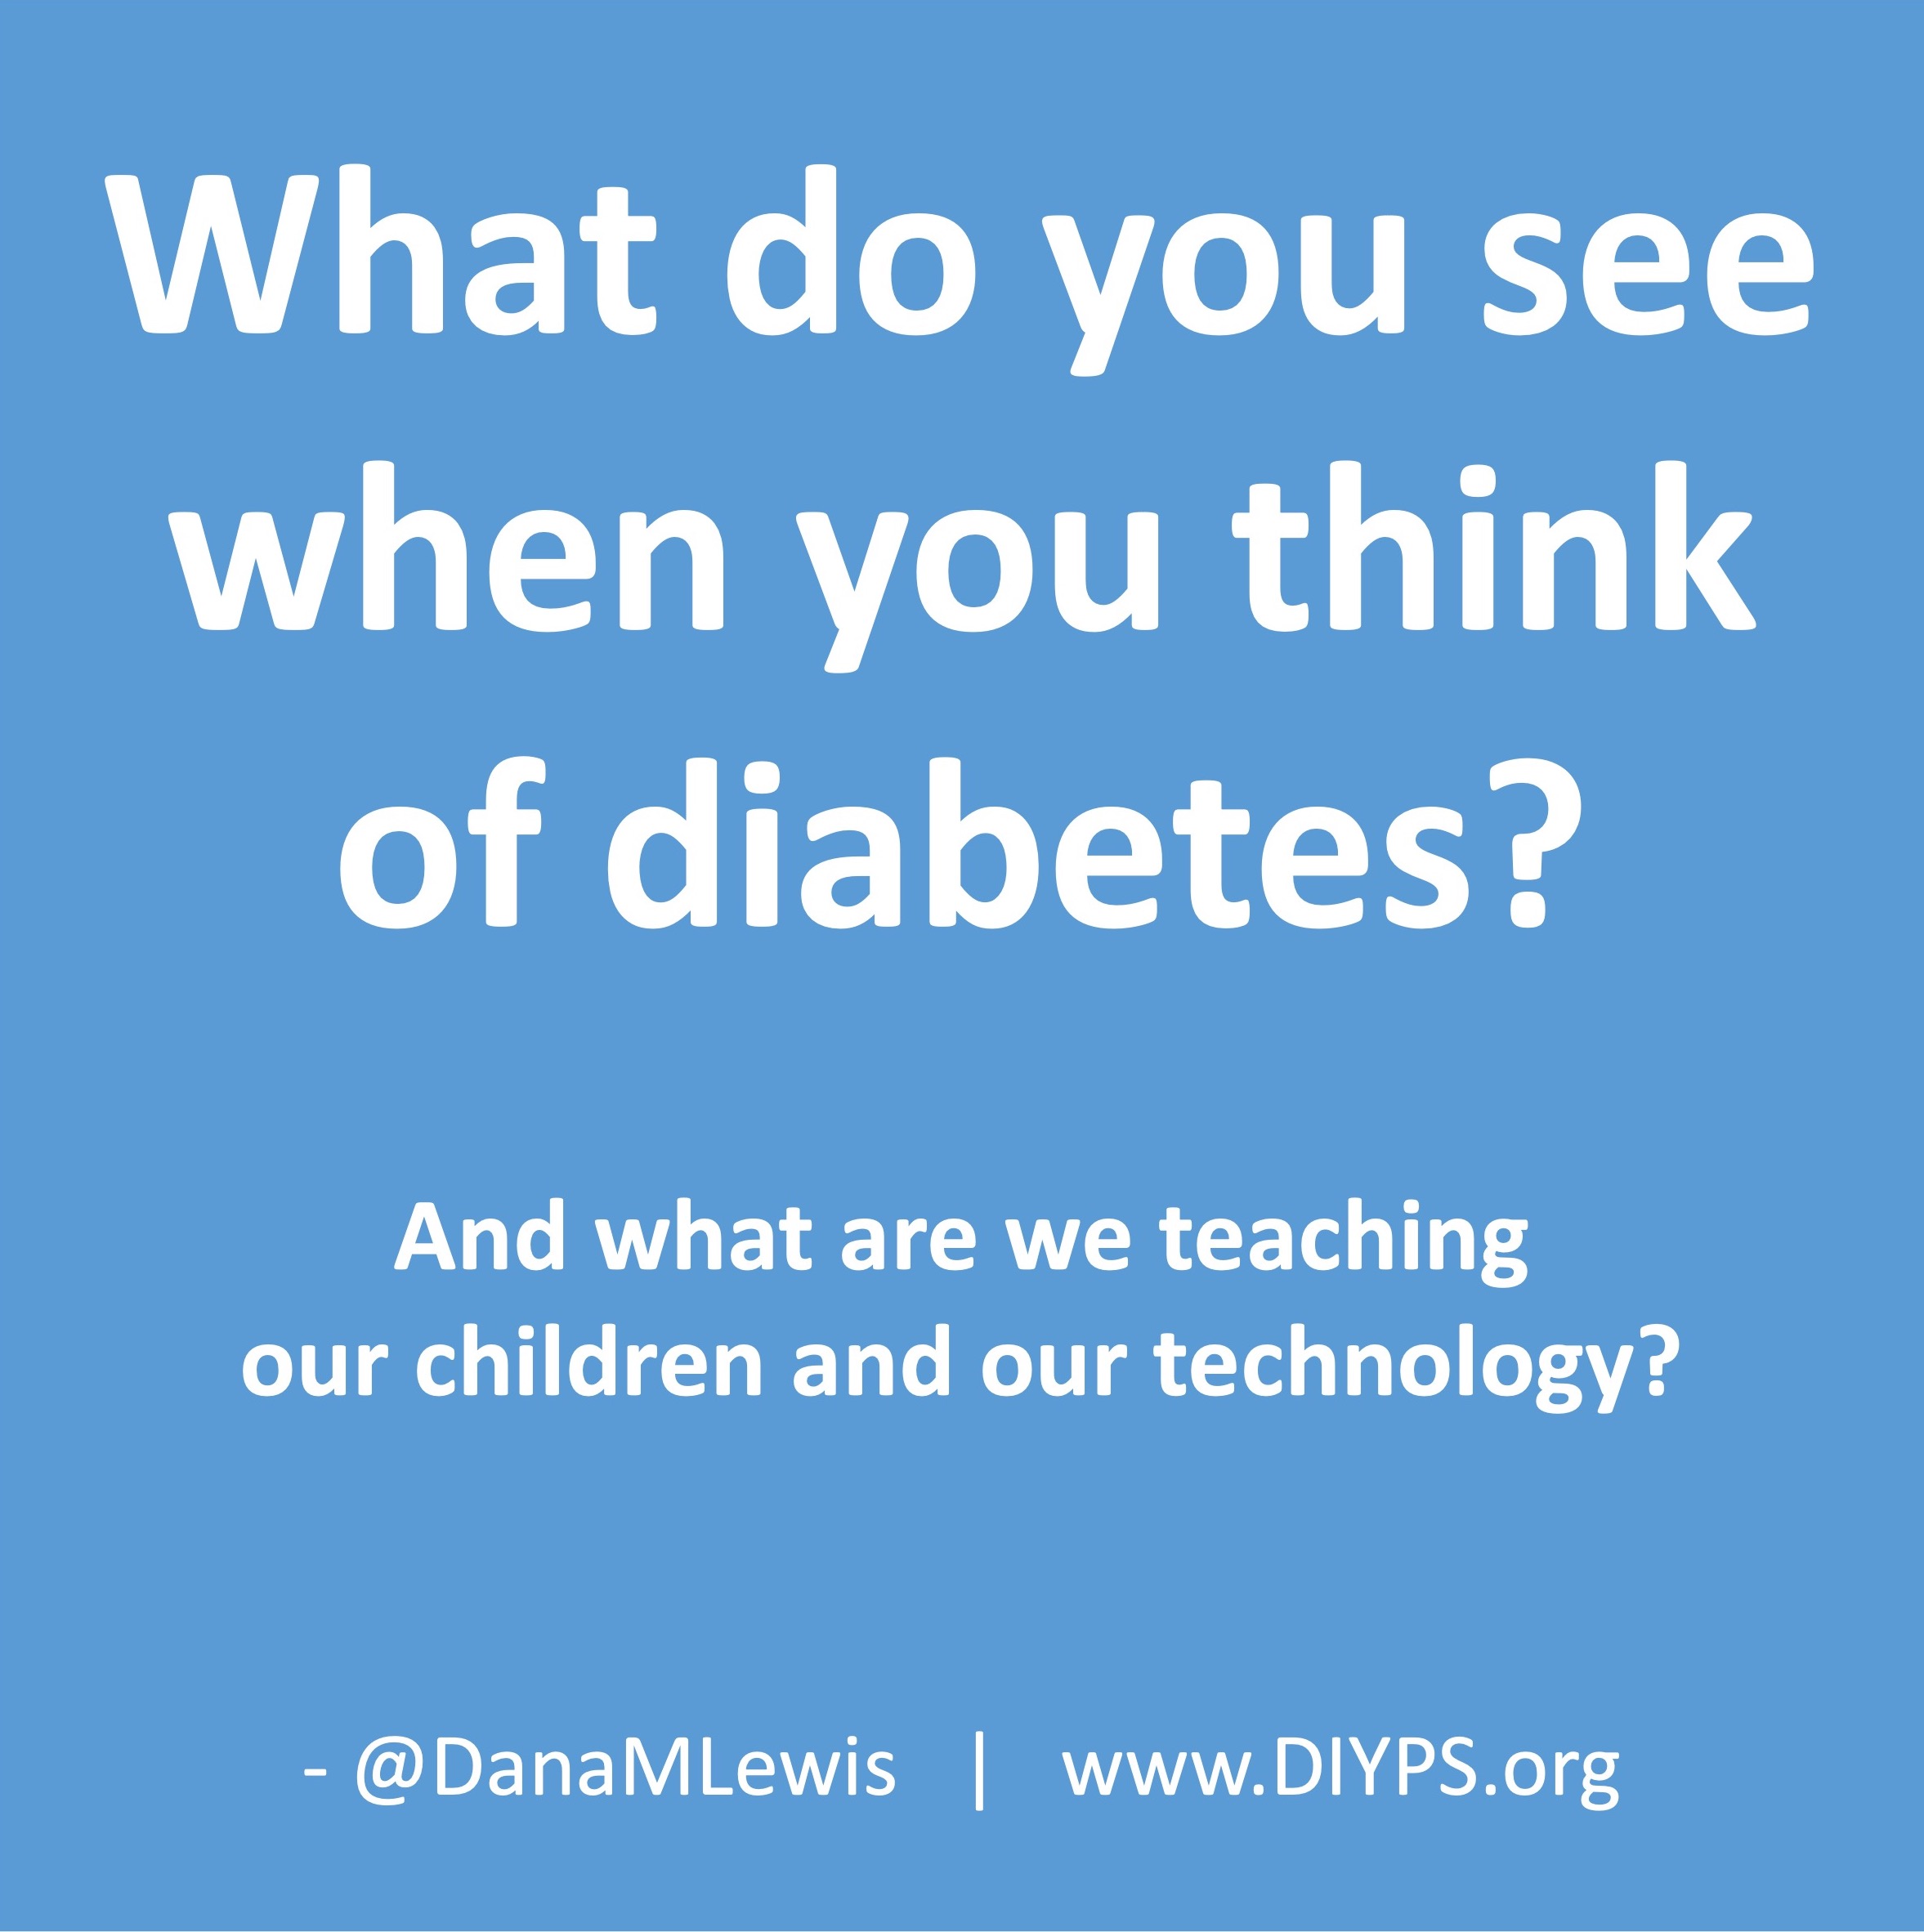 What do you see when you think of diabetes? And what are we teaching our children and our technology?